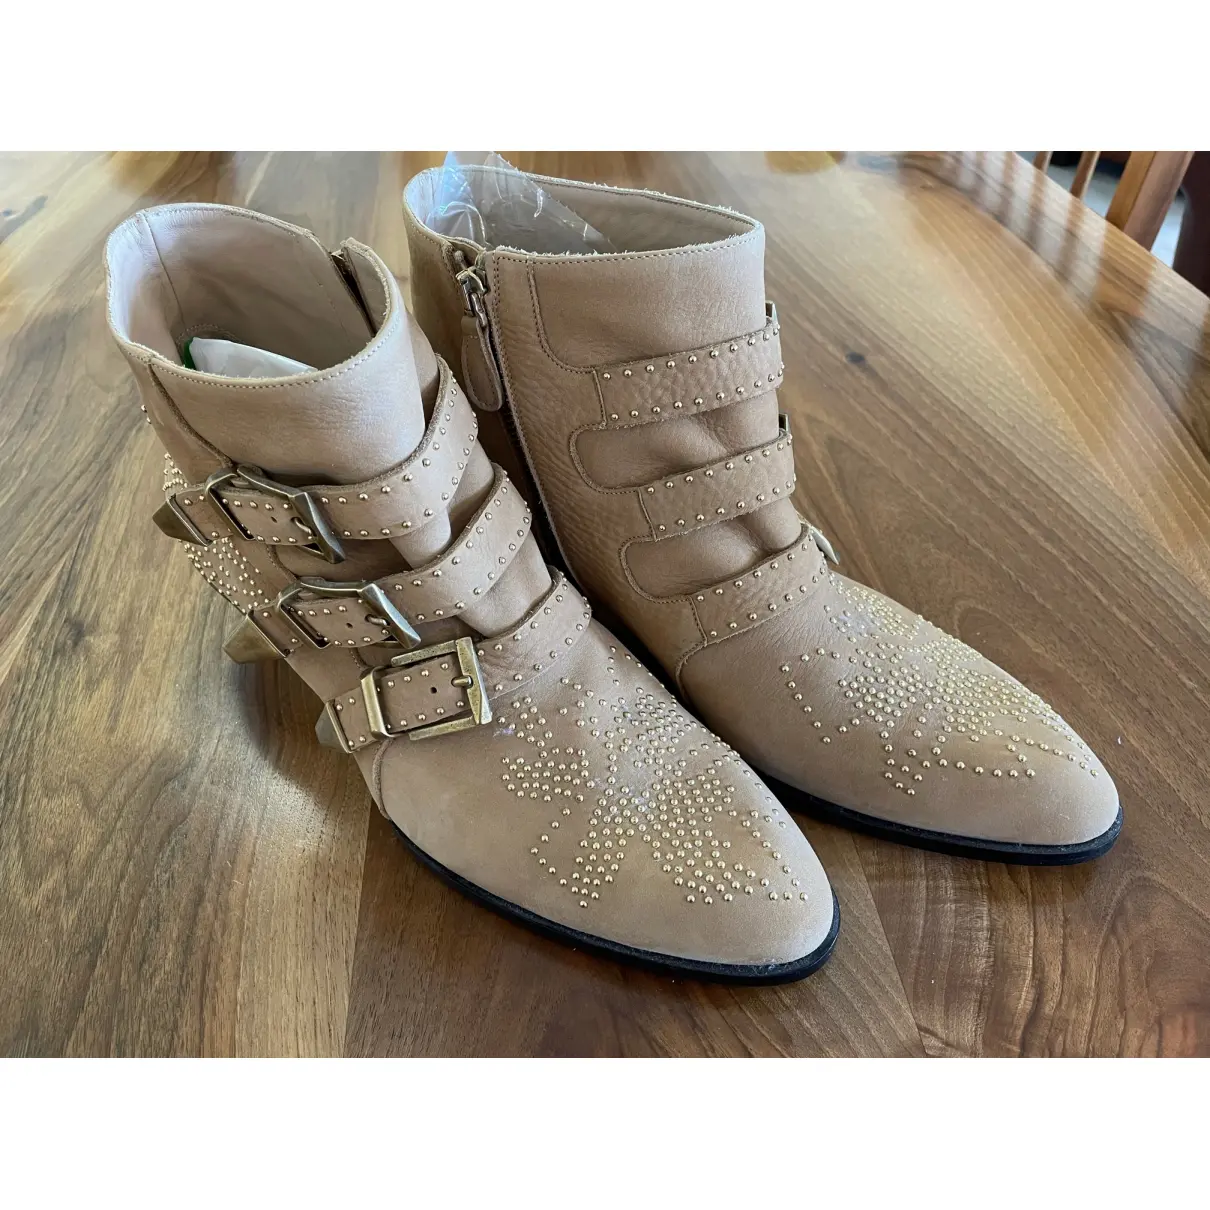 Leather ankle boots Chloé